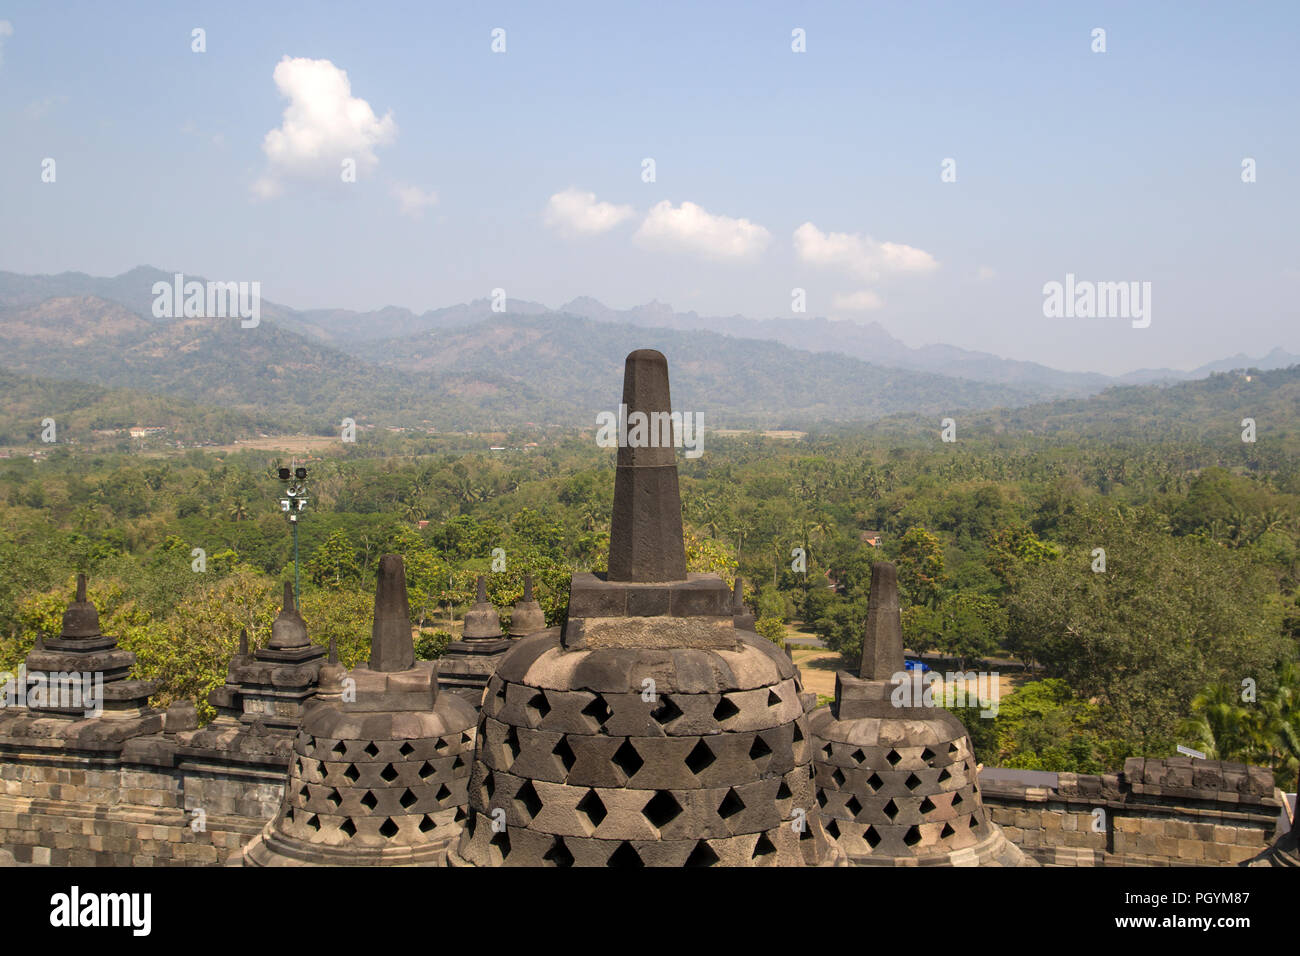 Landscape view from the Borobudur temple, Java, Indonesia Stock Photo